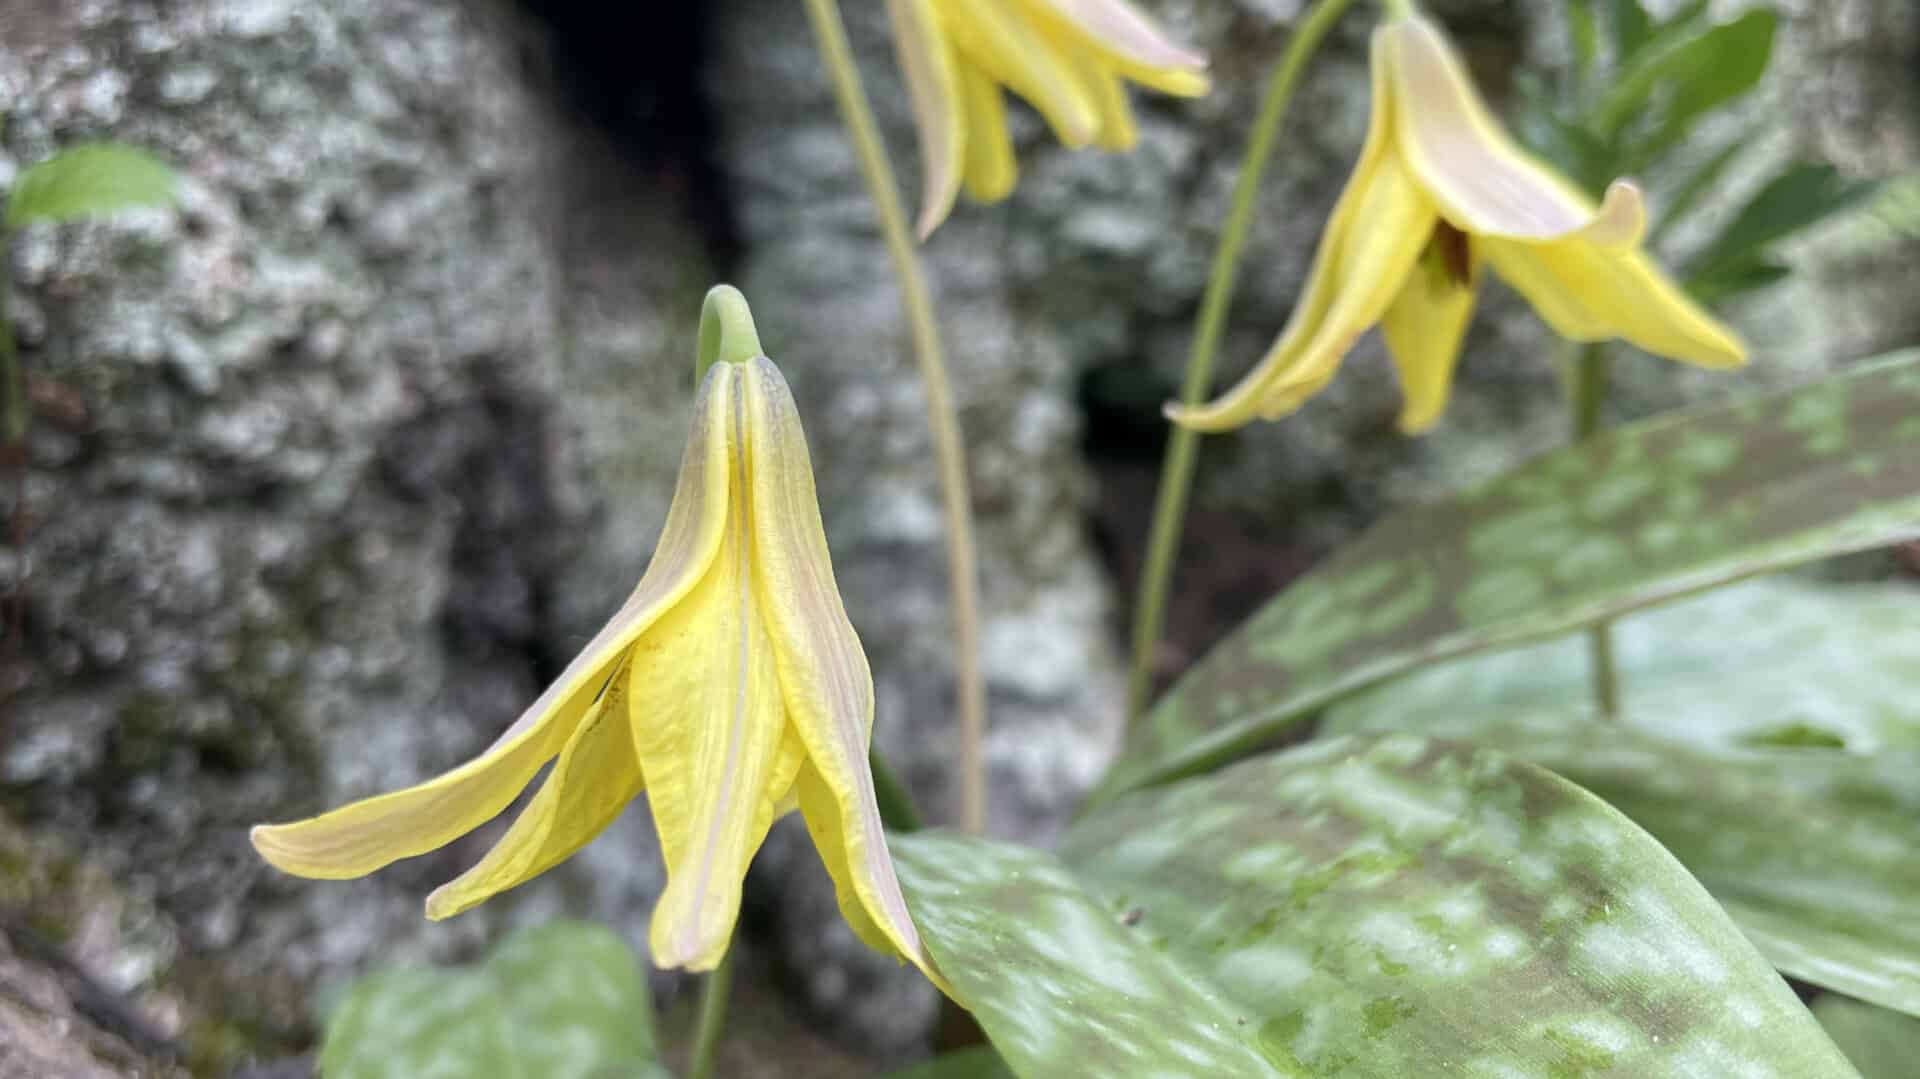 Trout lilies cluster at the foot of a tree on an April day at Bartholomew's Cobble in Sheffield.